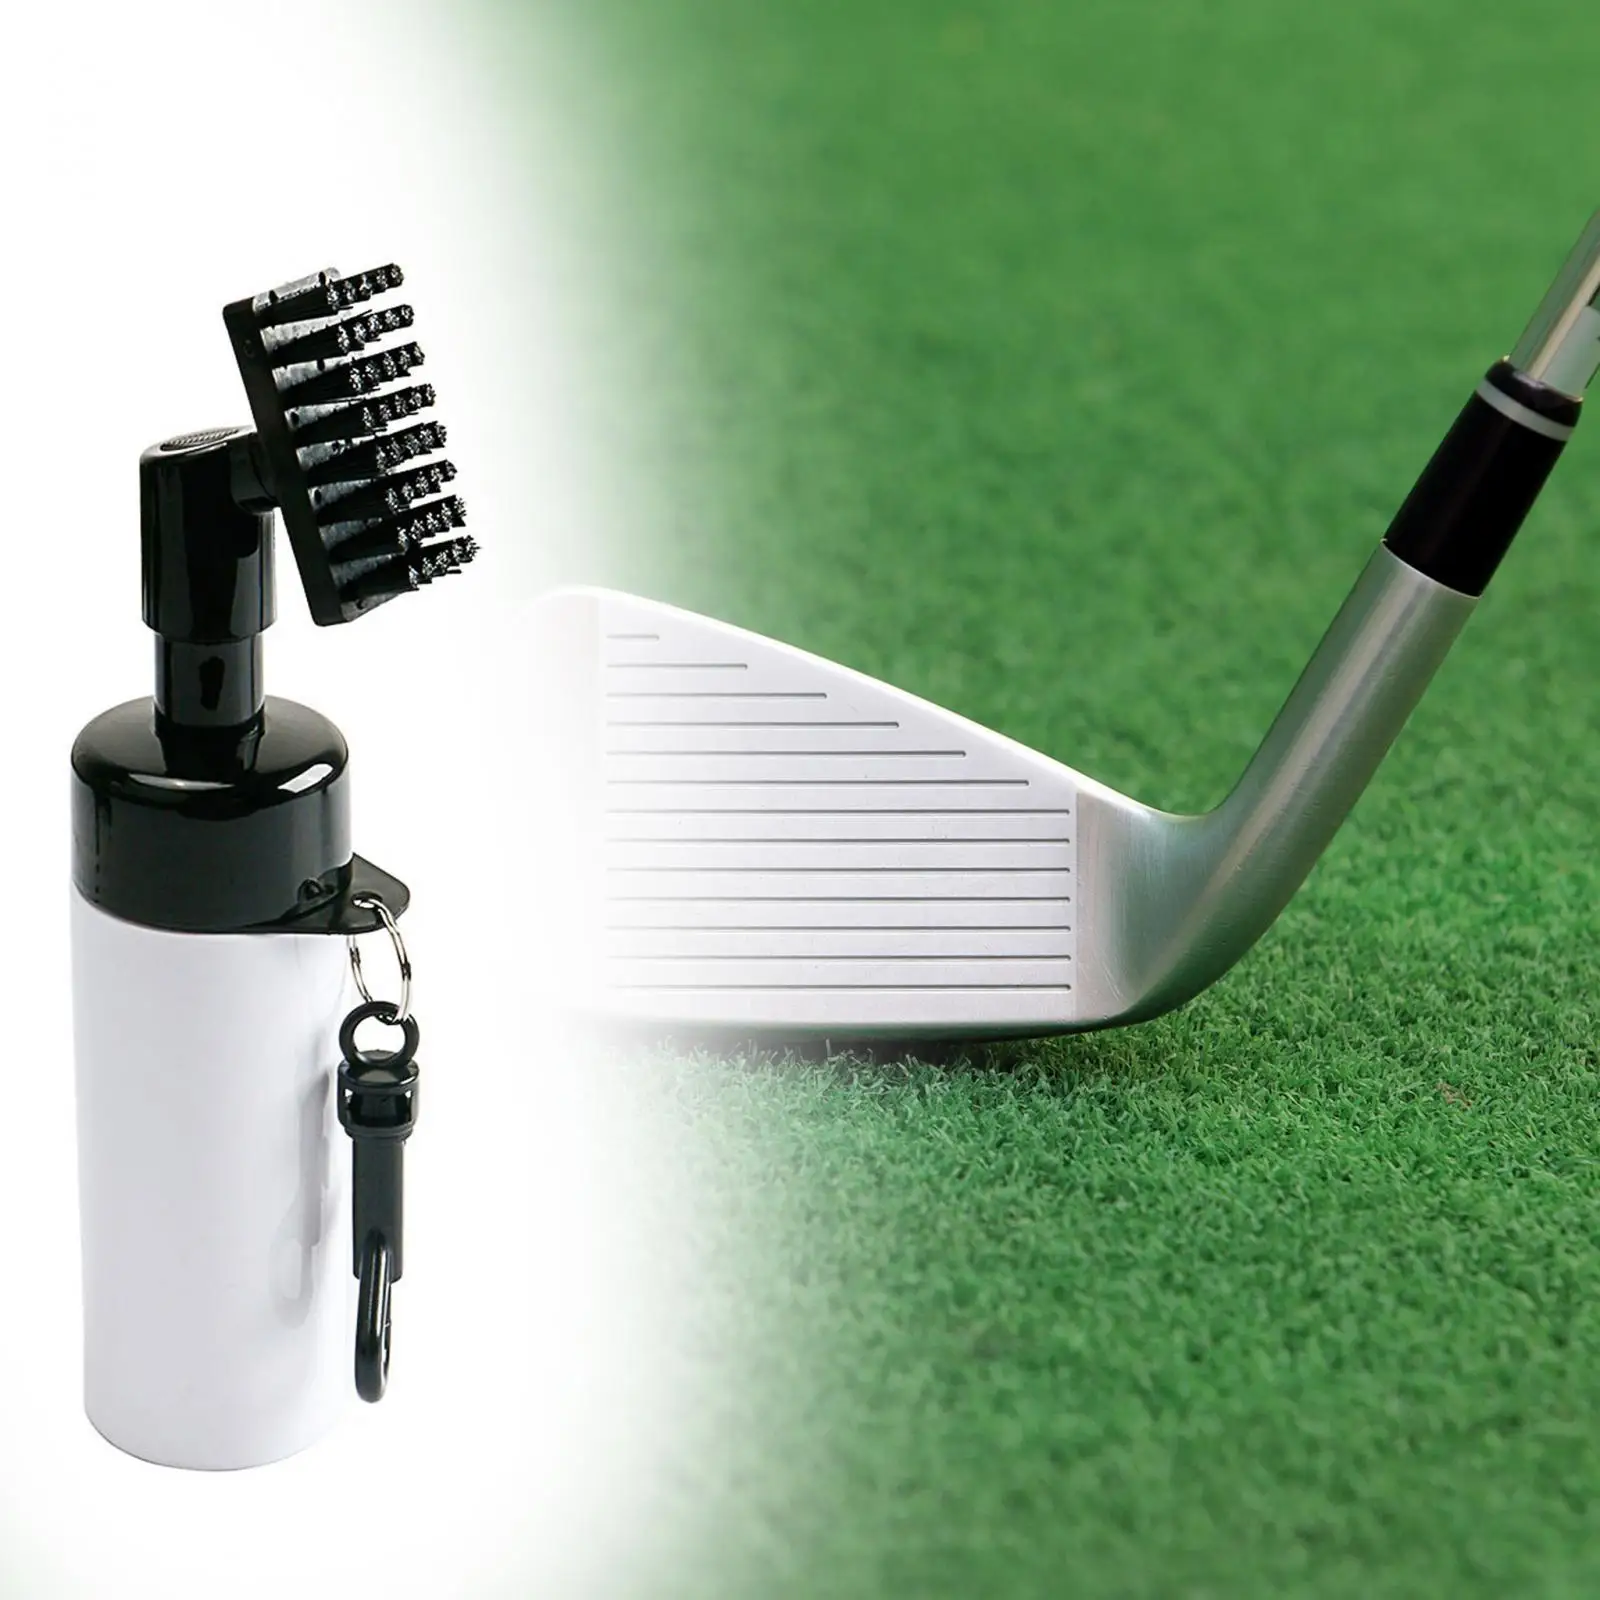 Golf Club Cleaner Brush with Water Gift Equipment Golf Bag Supplies Golf Club Groove Cleaner Cleaning Tool for Player Golf Irons